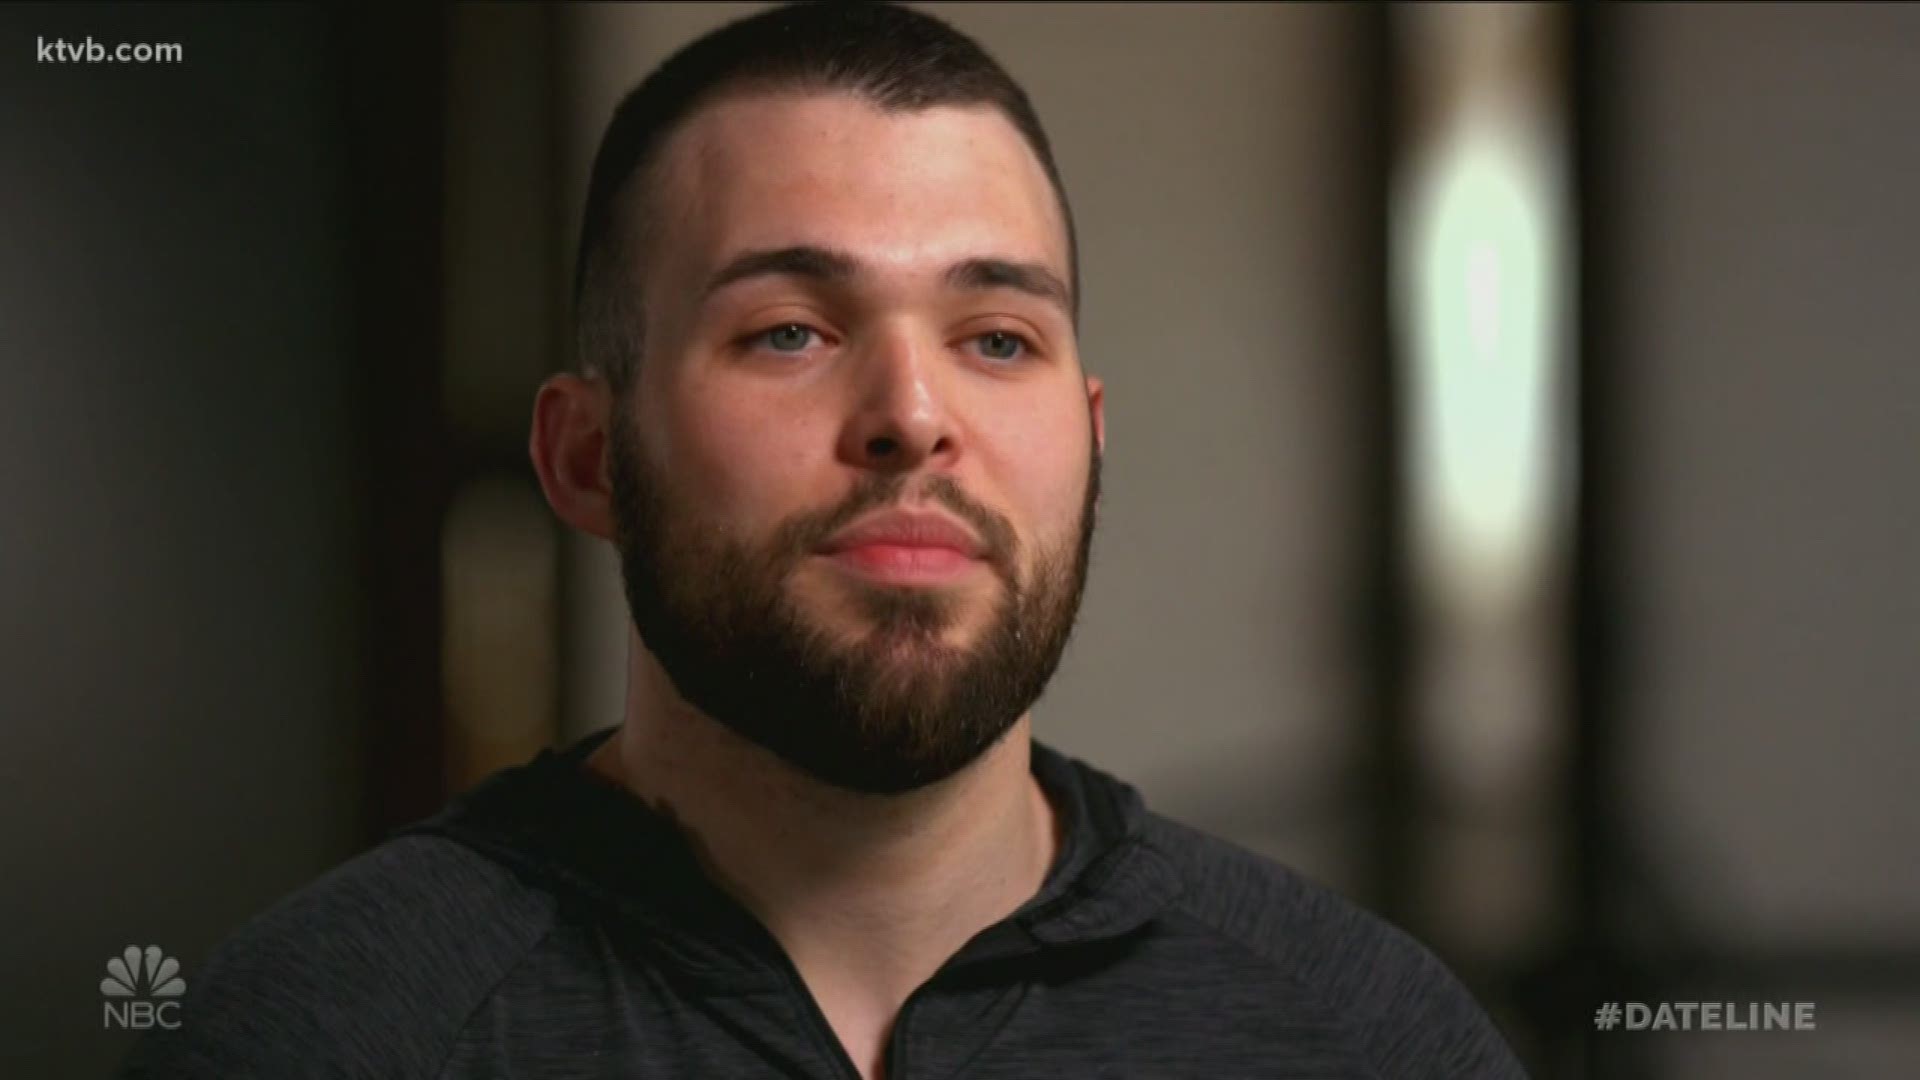 During Friday's two-hour episode of Dateline, Colby Ryan discussed what Tylee Ryan's father was like during his first-ever network TV interview.